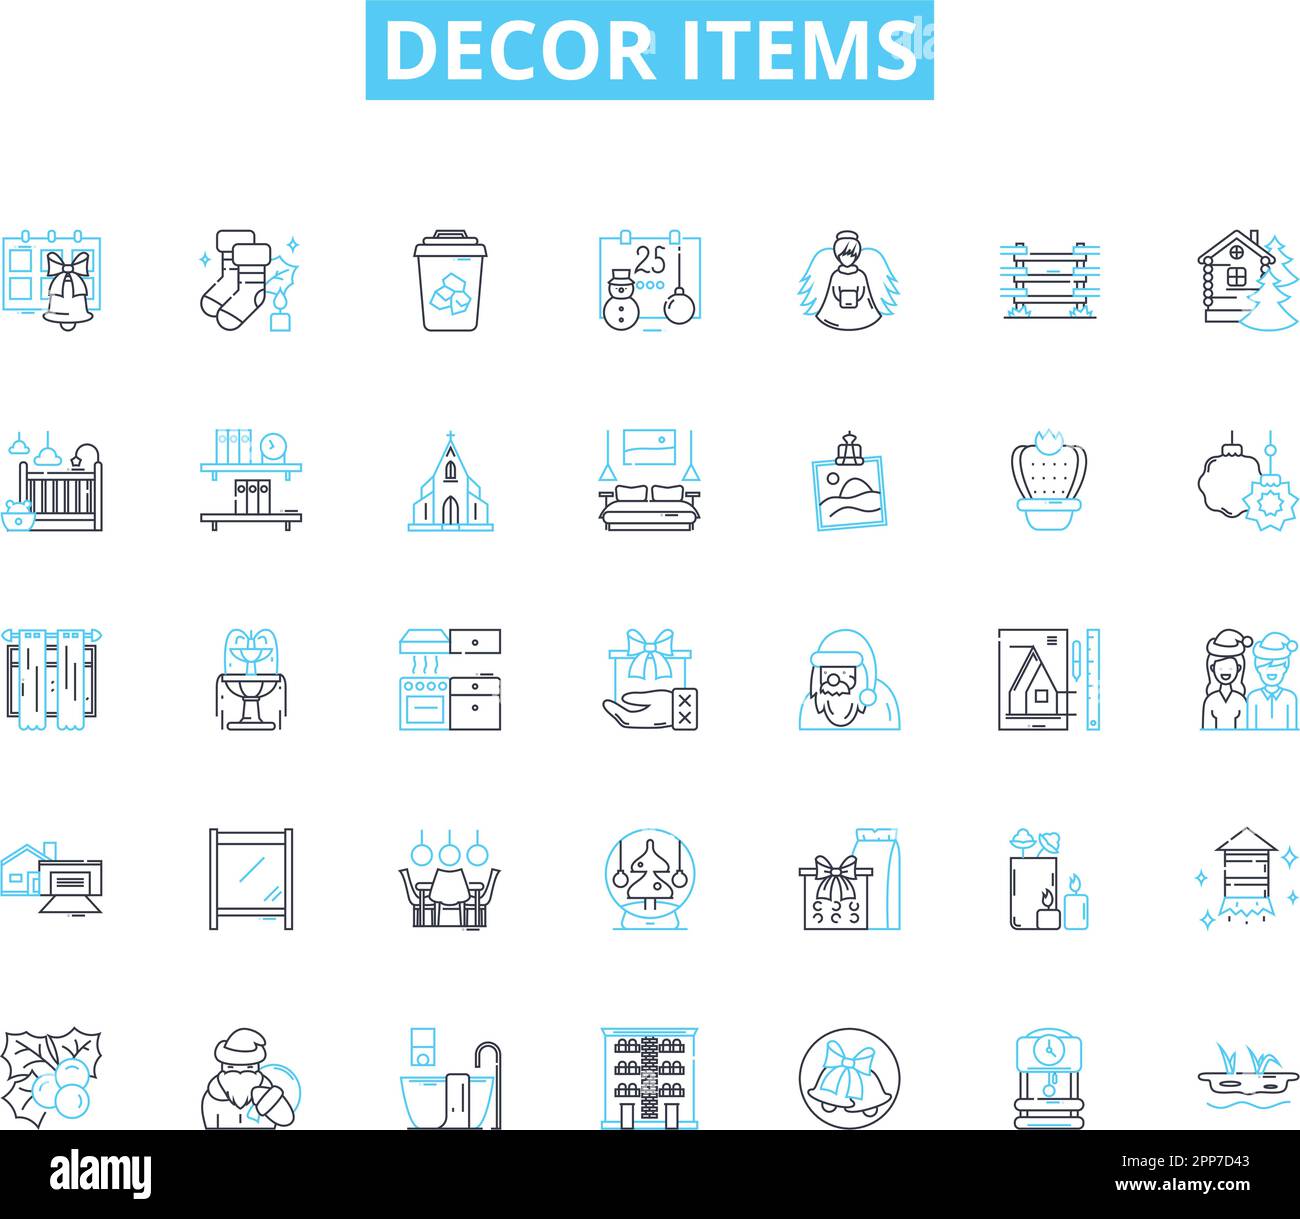 Decor items linear icons set. Vase, Pillow, Lamp, Rug, Tablecloth, Shelves, Arrk line vector and concept signs. Pottery,Clock,Curtain outline Stock Vector